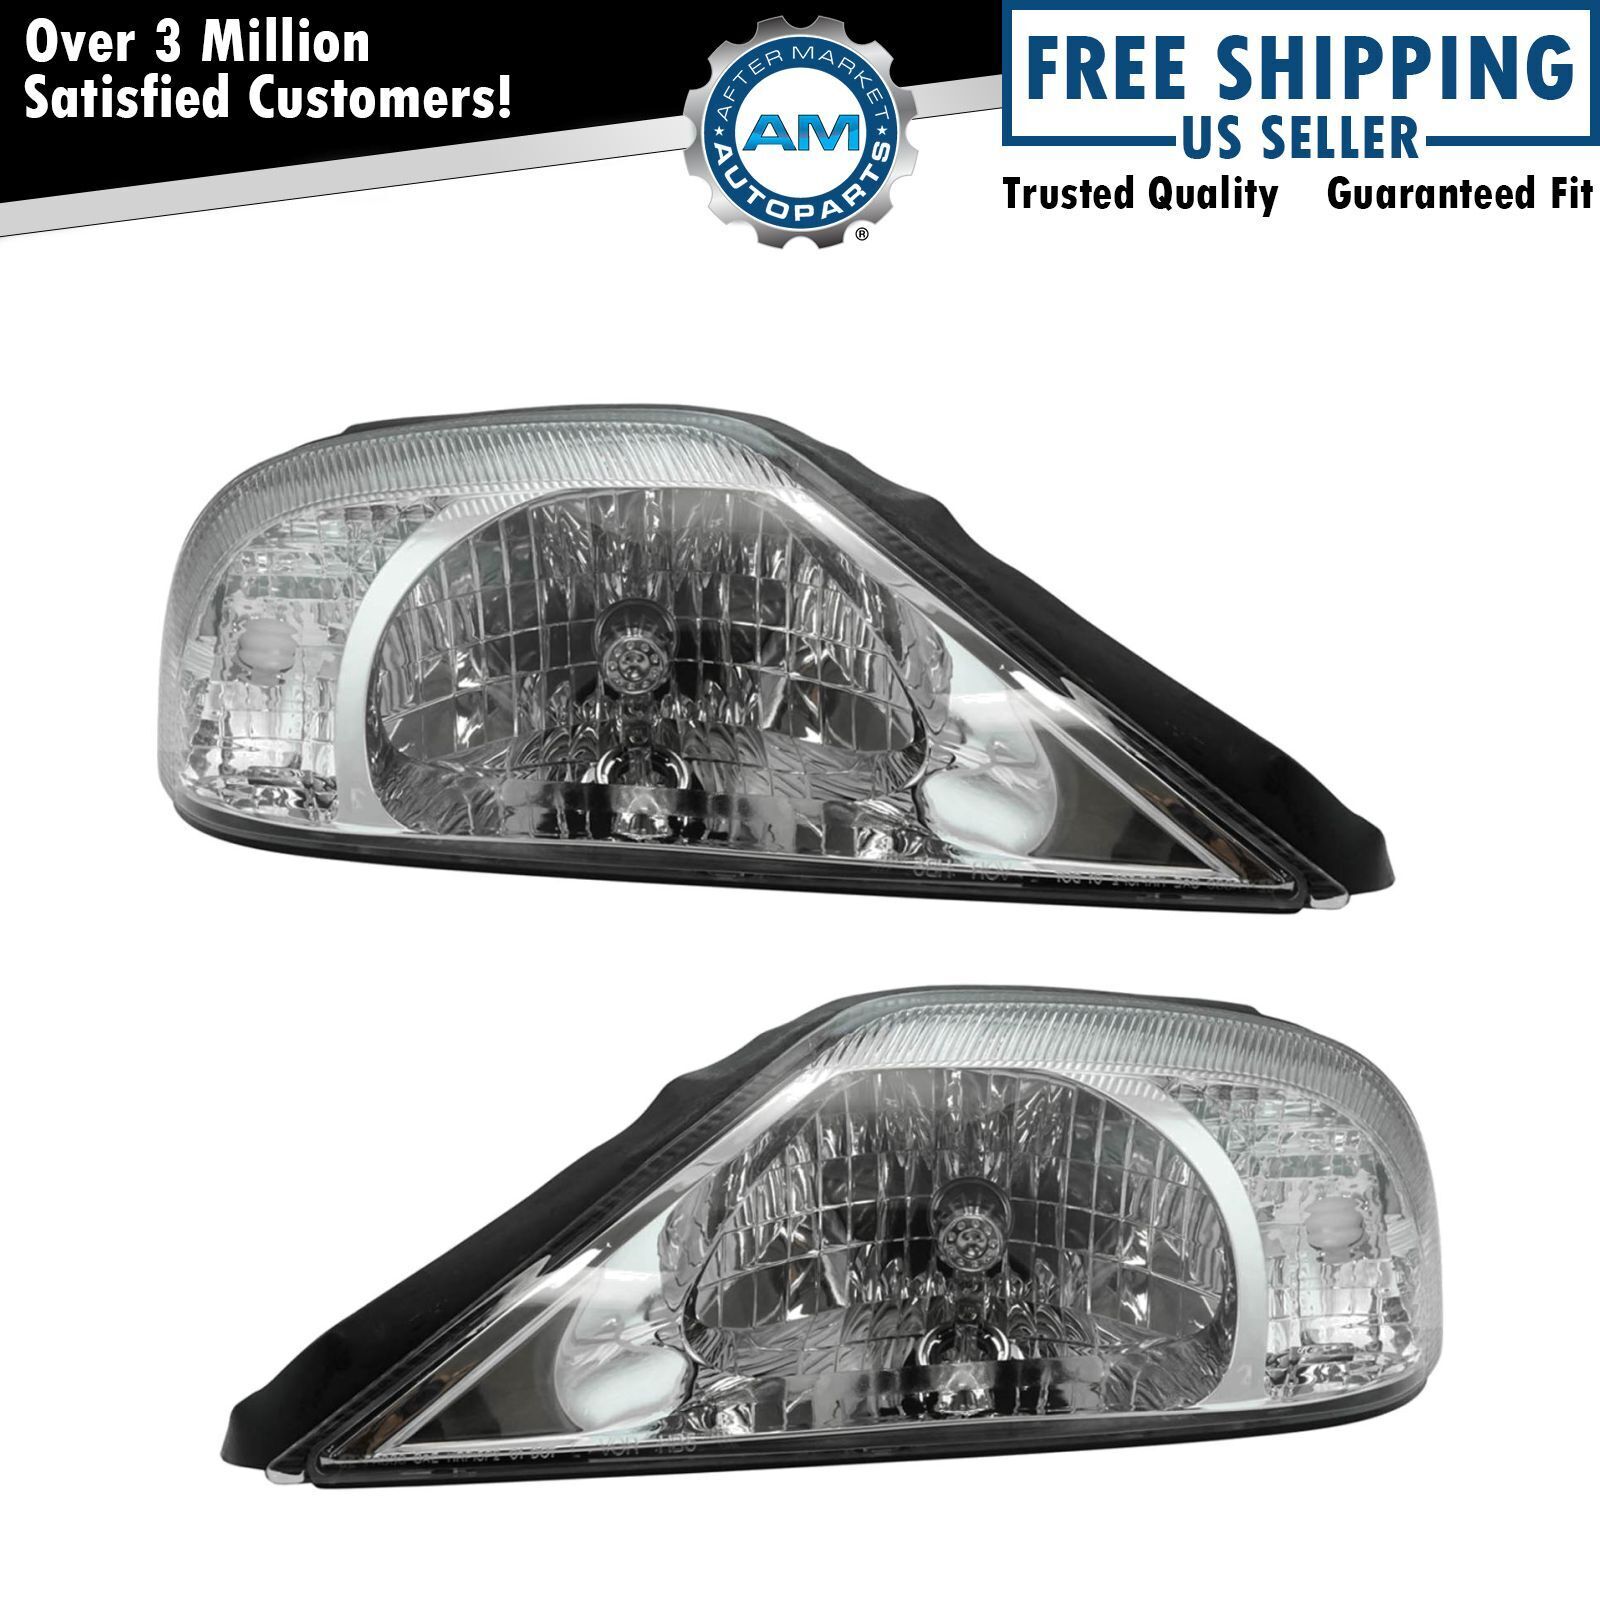 Headlights Headlamps Left & Right Pair Set NEW for 00-05 Mercury Sable